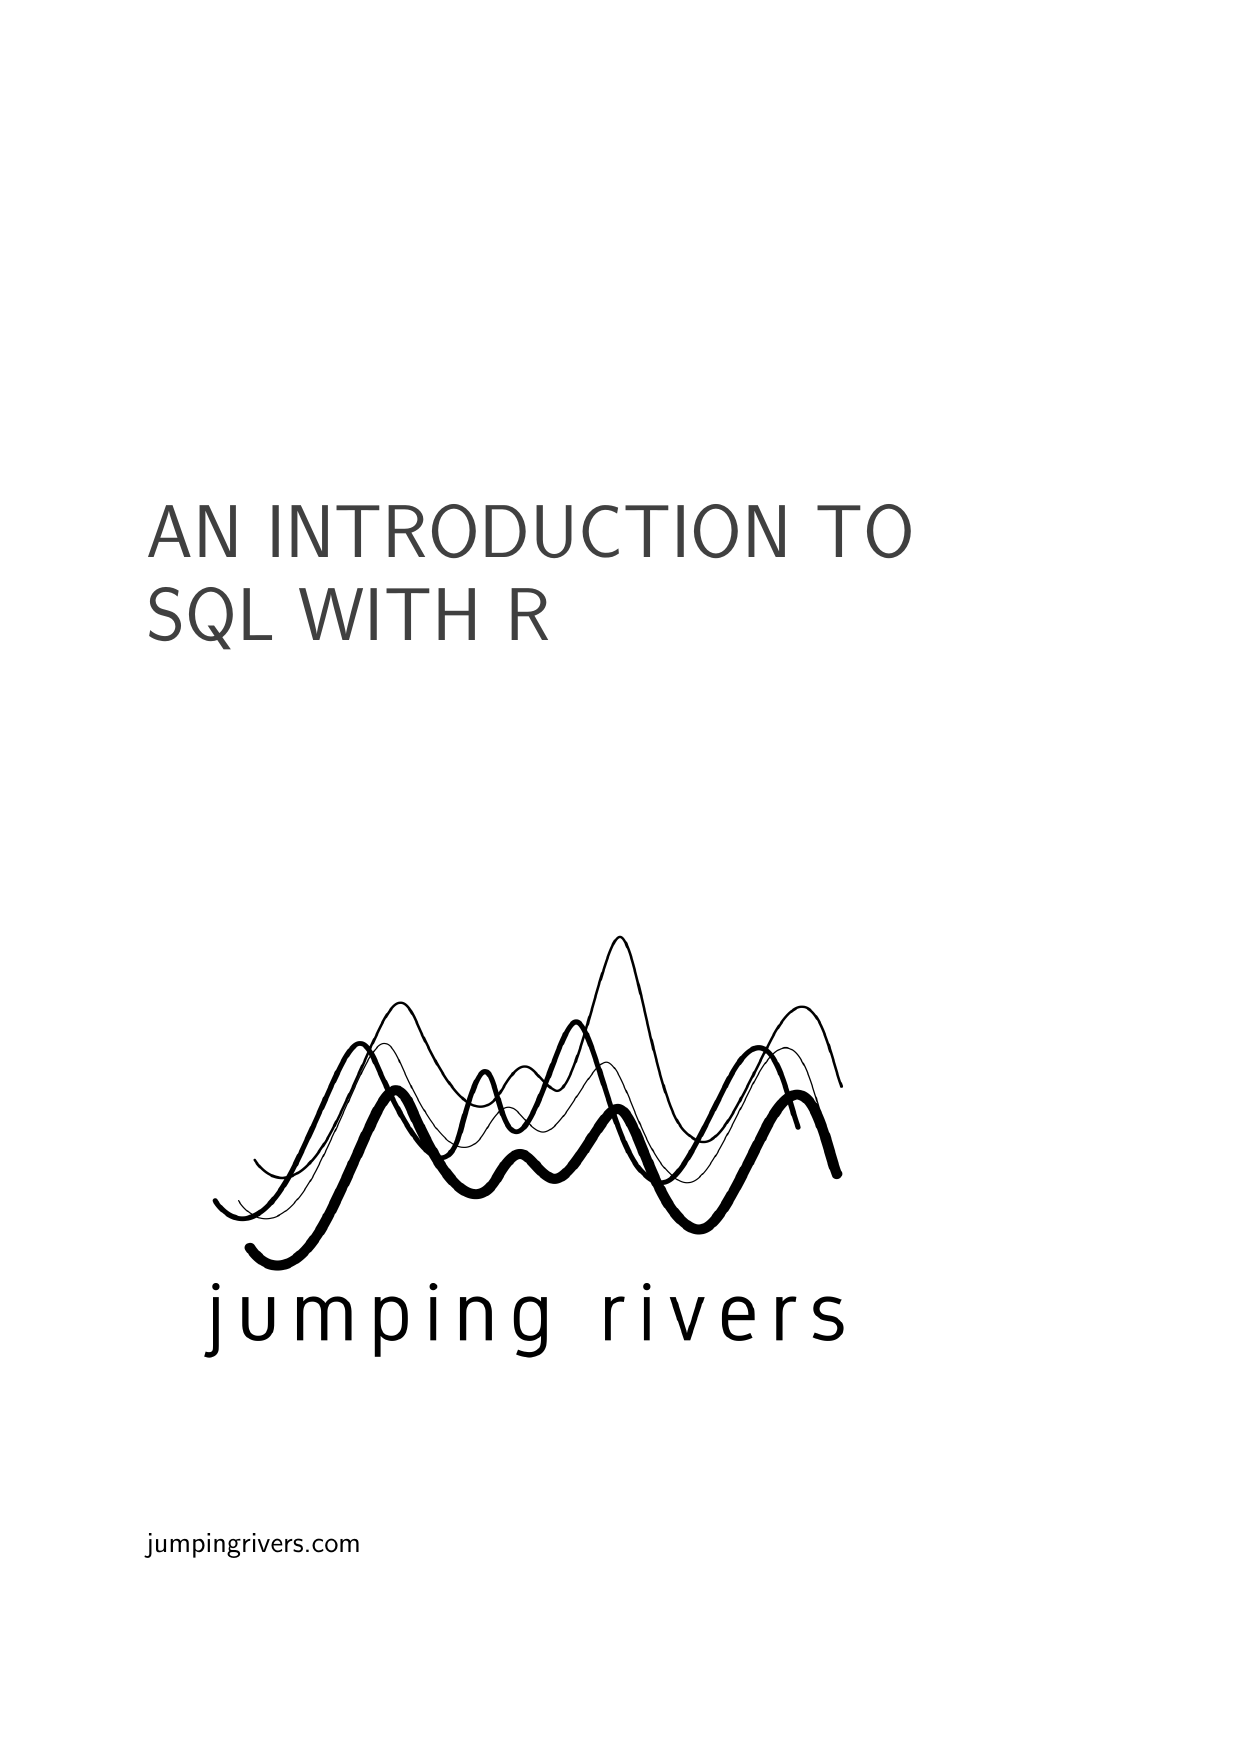 Page 1 of example course material for  An Introduction to SQL with R